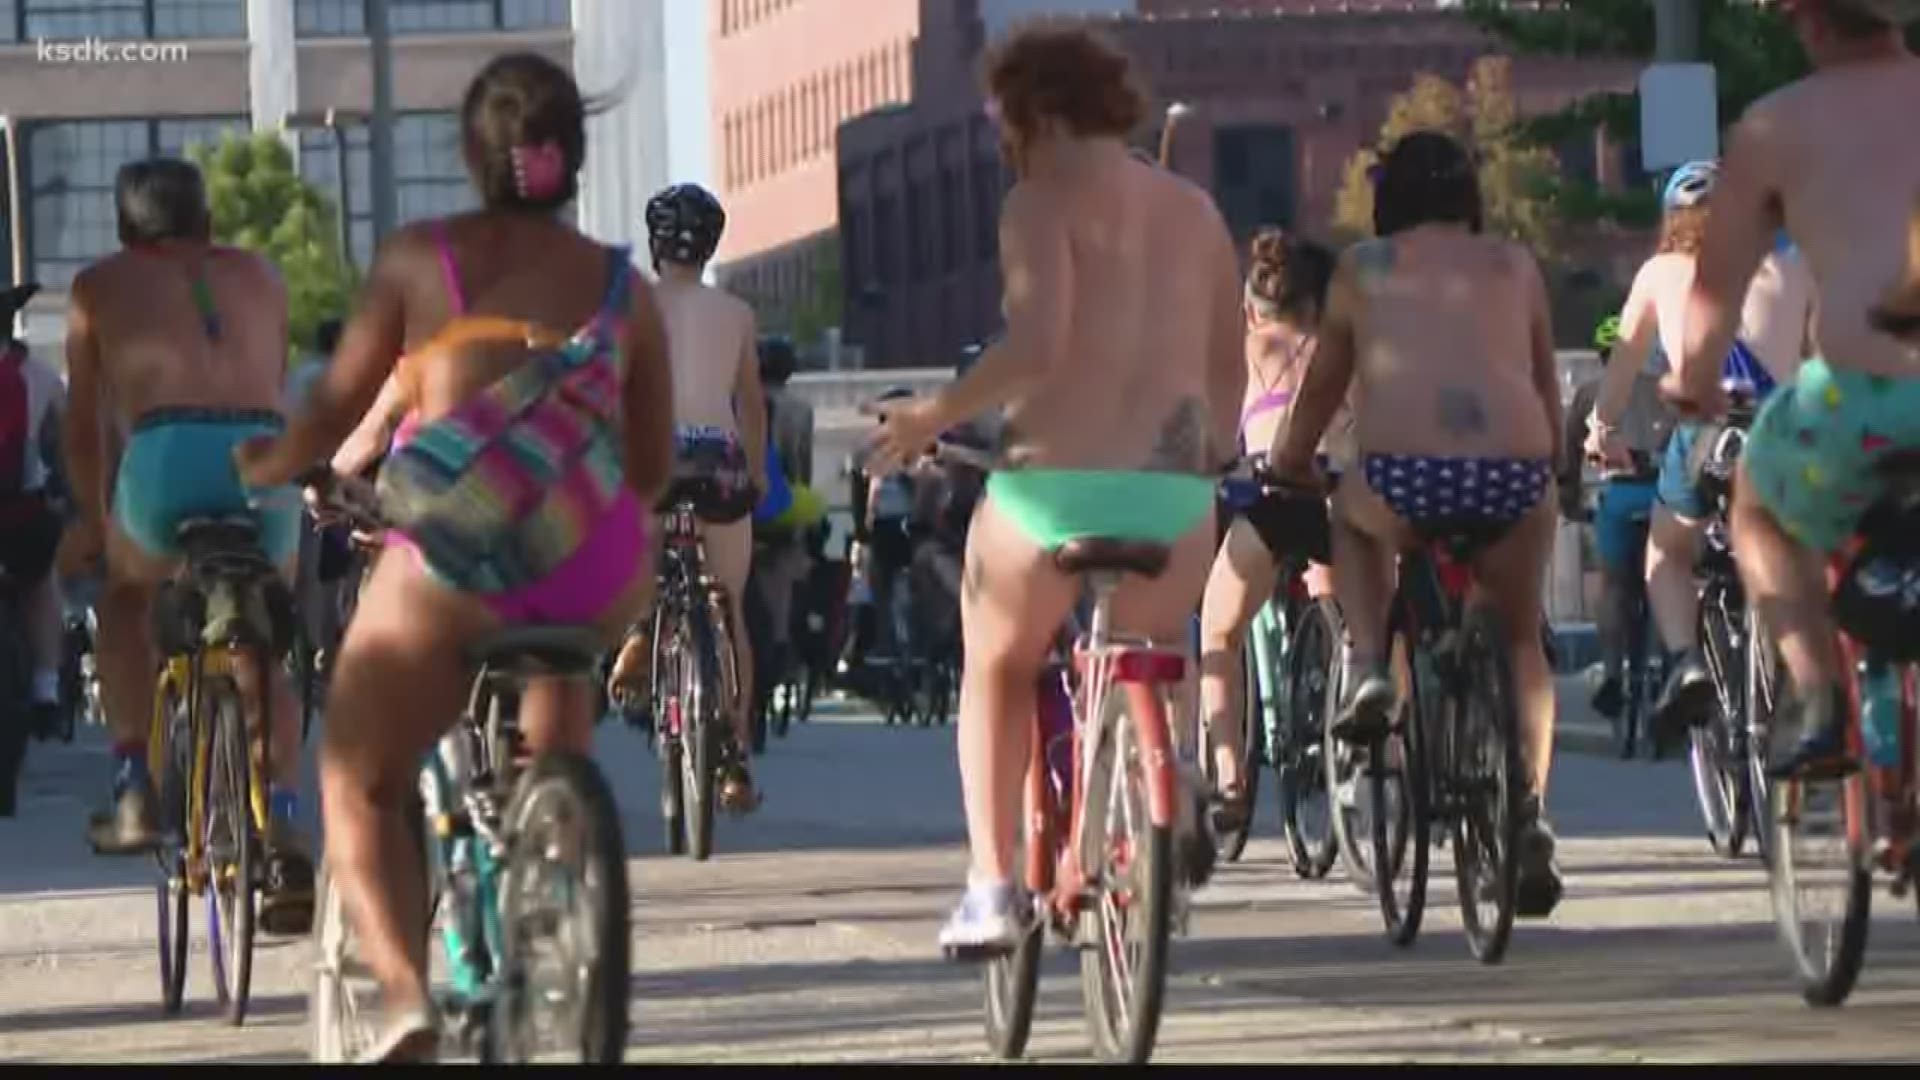 A ride that was supposed to be fun ended up becoming a targeted event. More than 1,000 cyclists came out for the World Naked Bike Ride in south city. But for the first time, they saw something that’s never happened before.